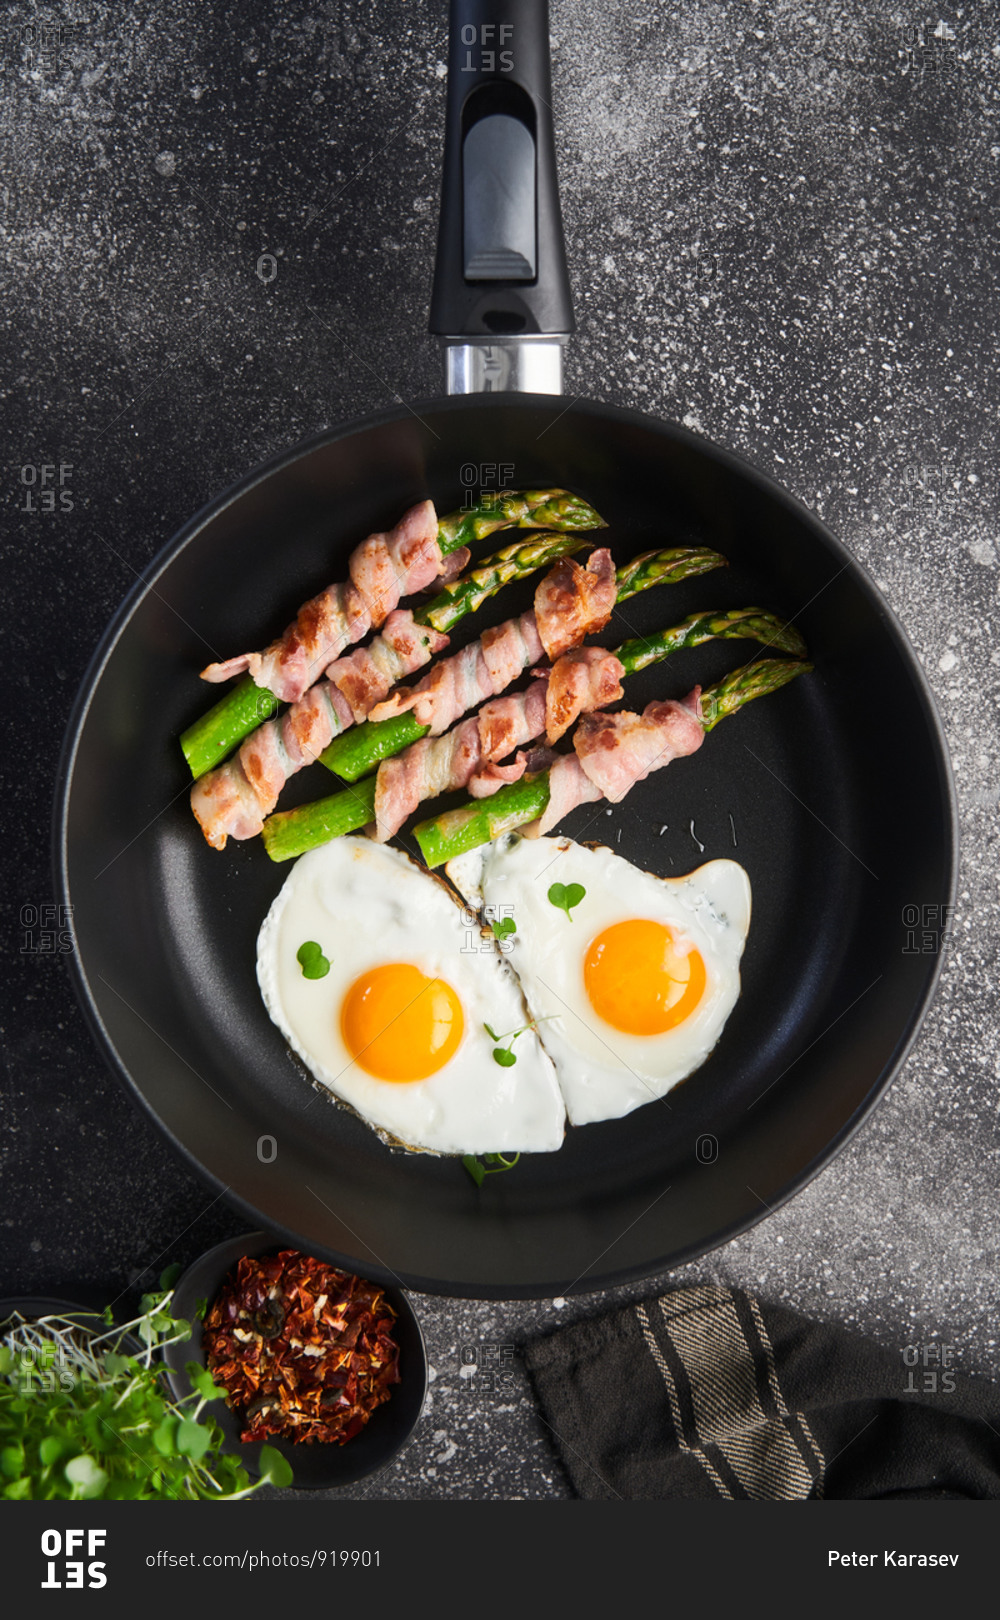 Overhead view of bacon wrapped asparagus with fried eggs in a skillet